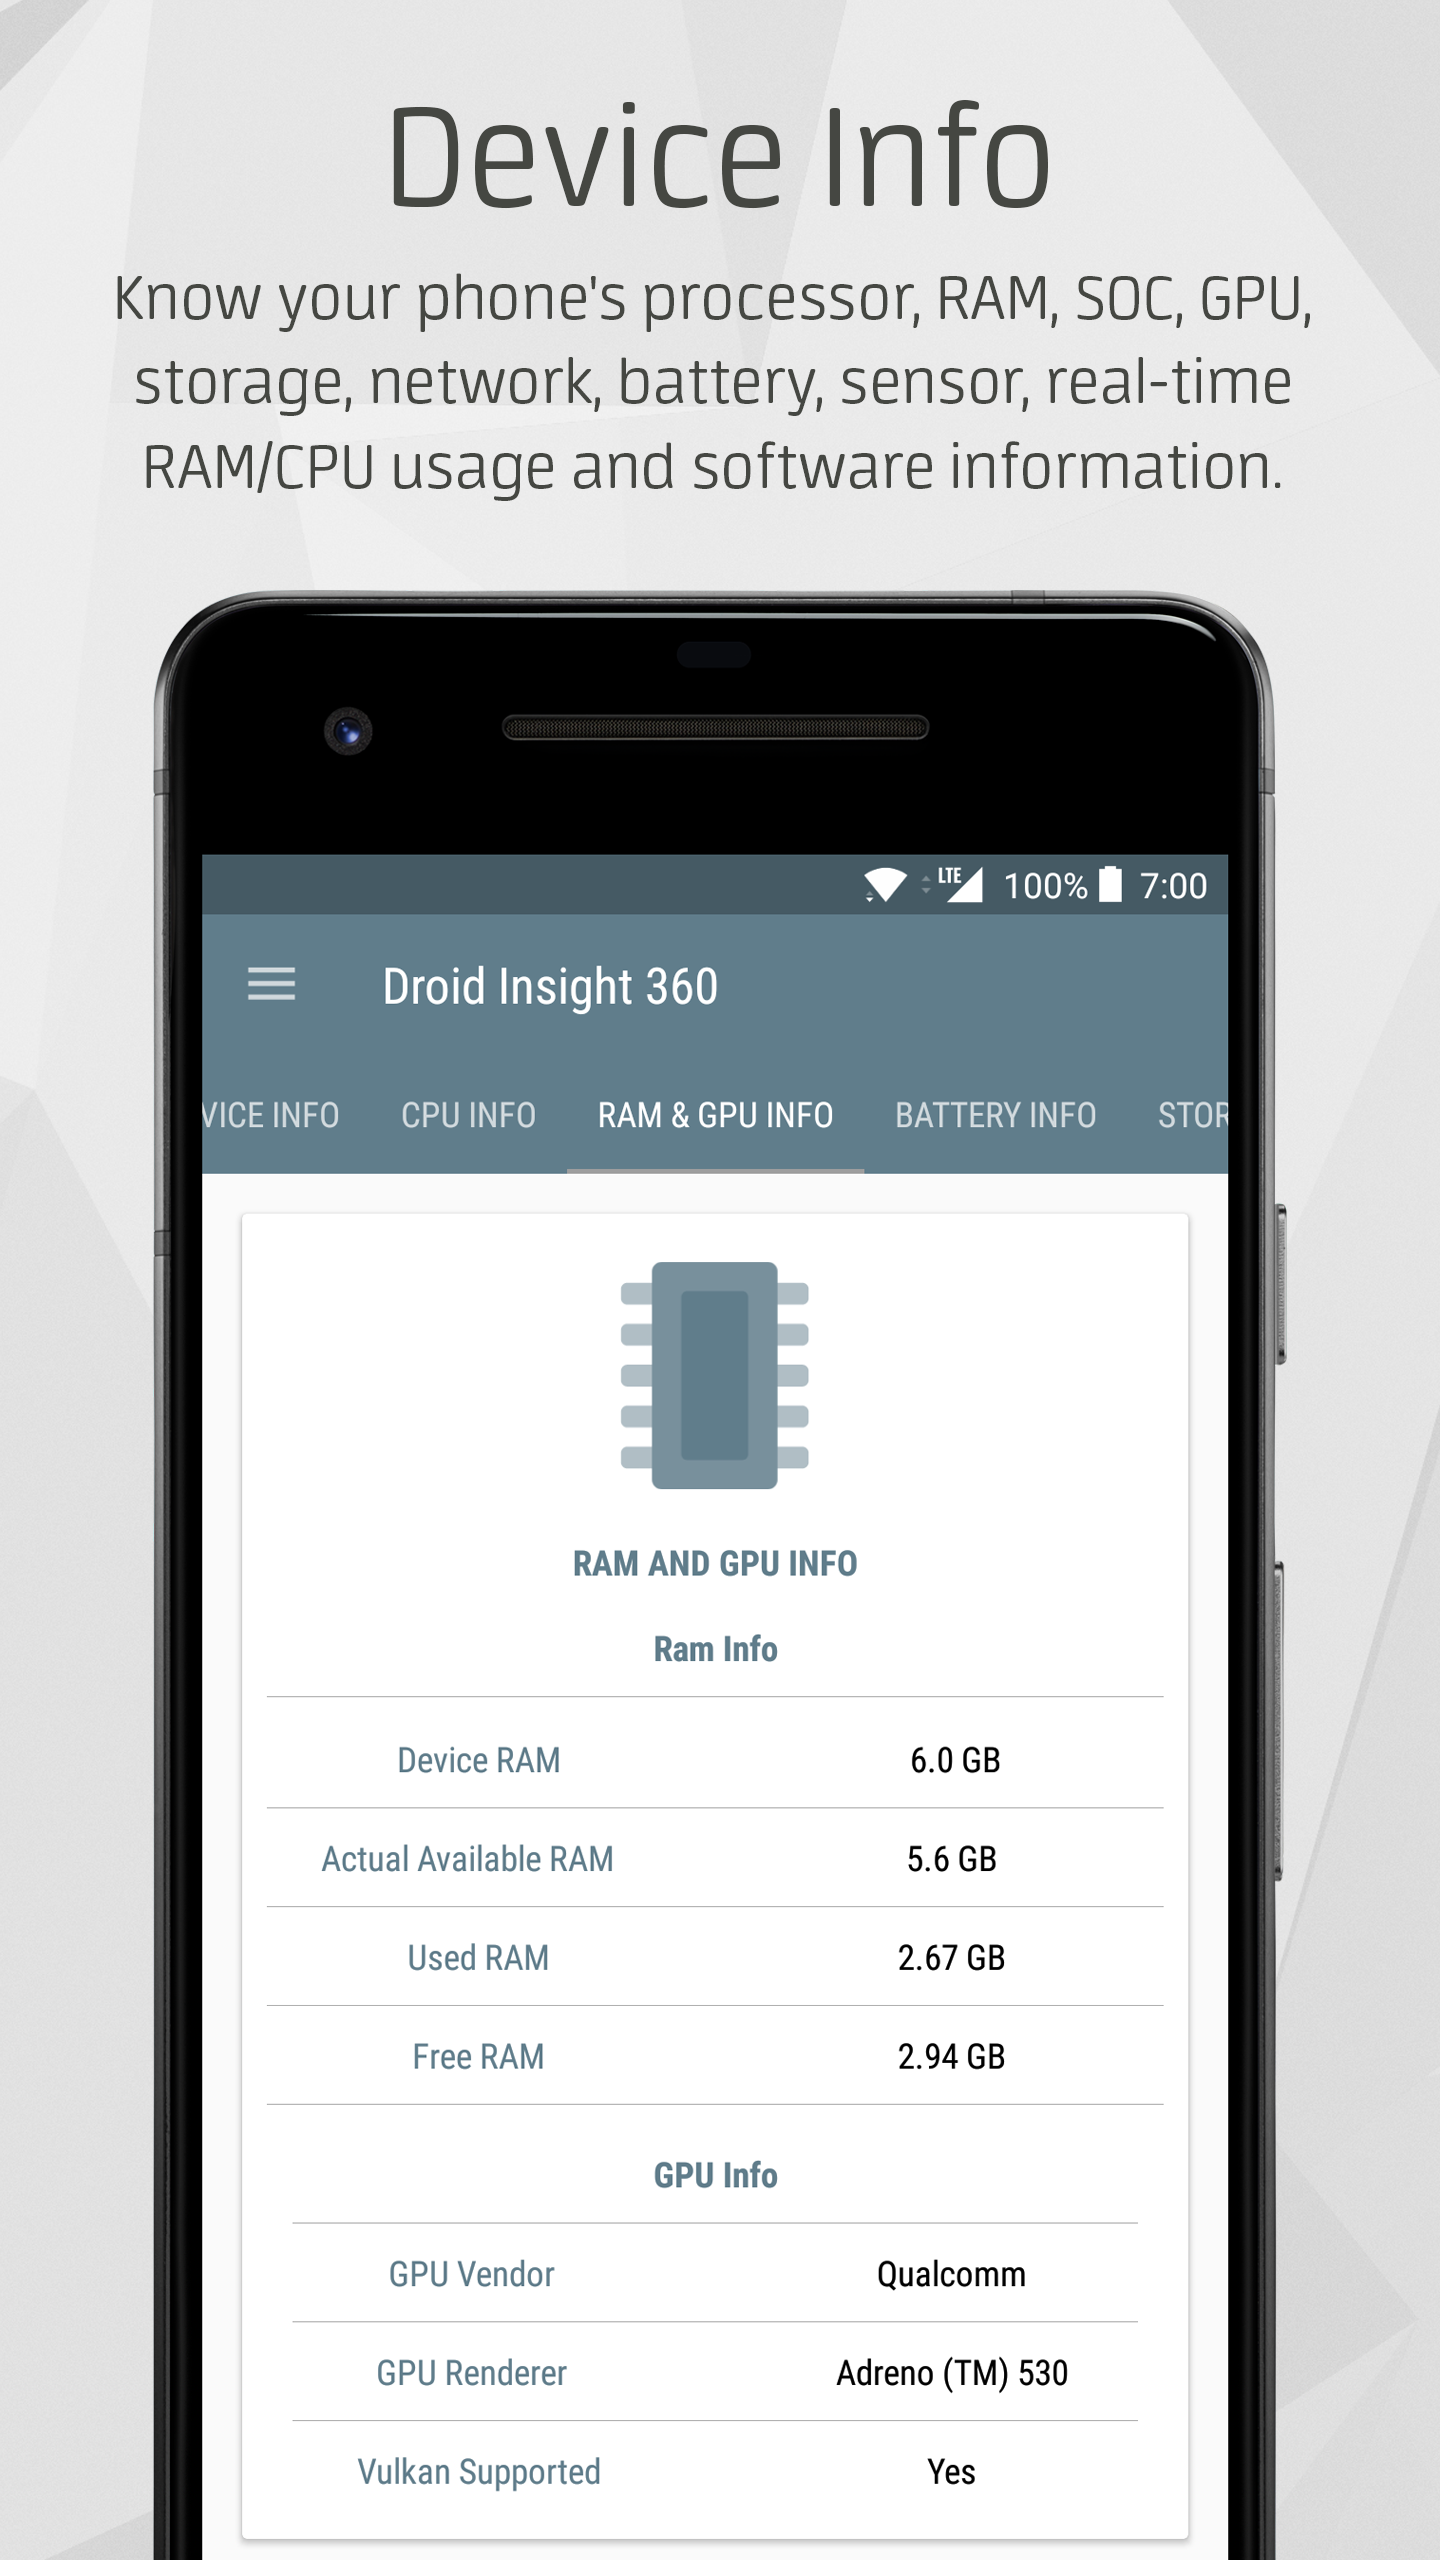 Droid Insight 360: Suite of five integrated Apps